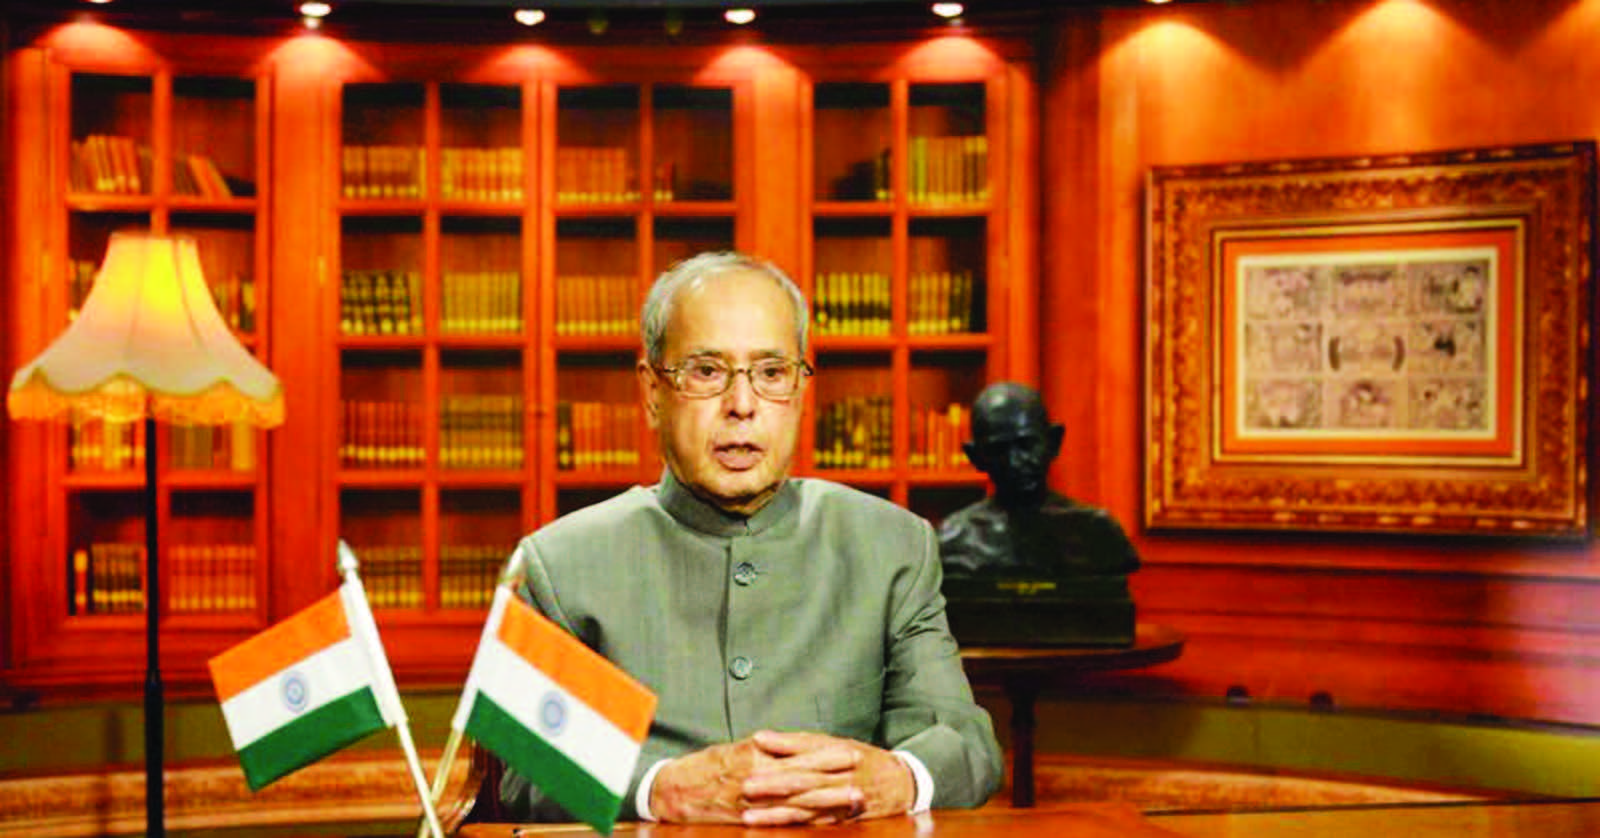 President Pranab Mukherjee addresses the nation on the eve of Republic Day. (Picture courtesy: Twitter/President of India)